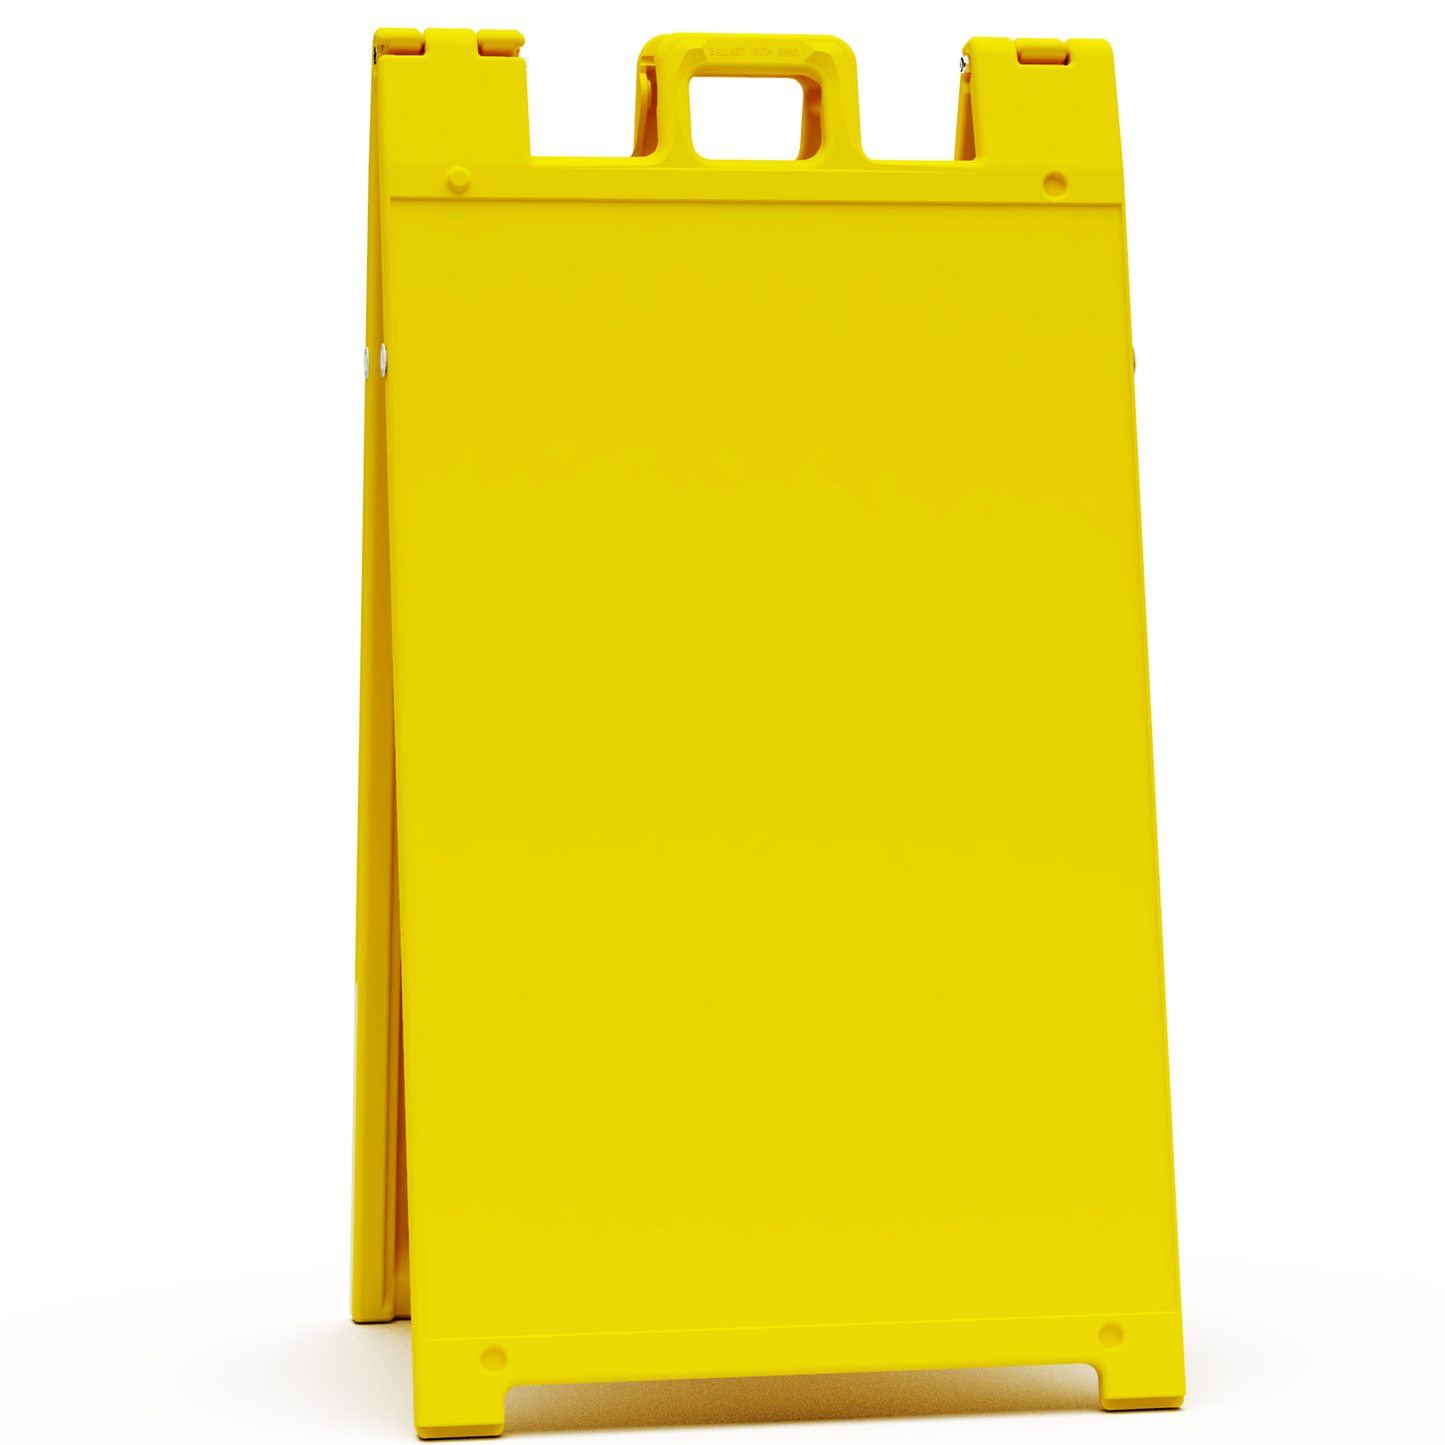 Signicade® Safety Signs